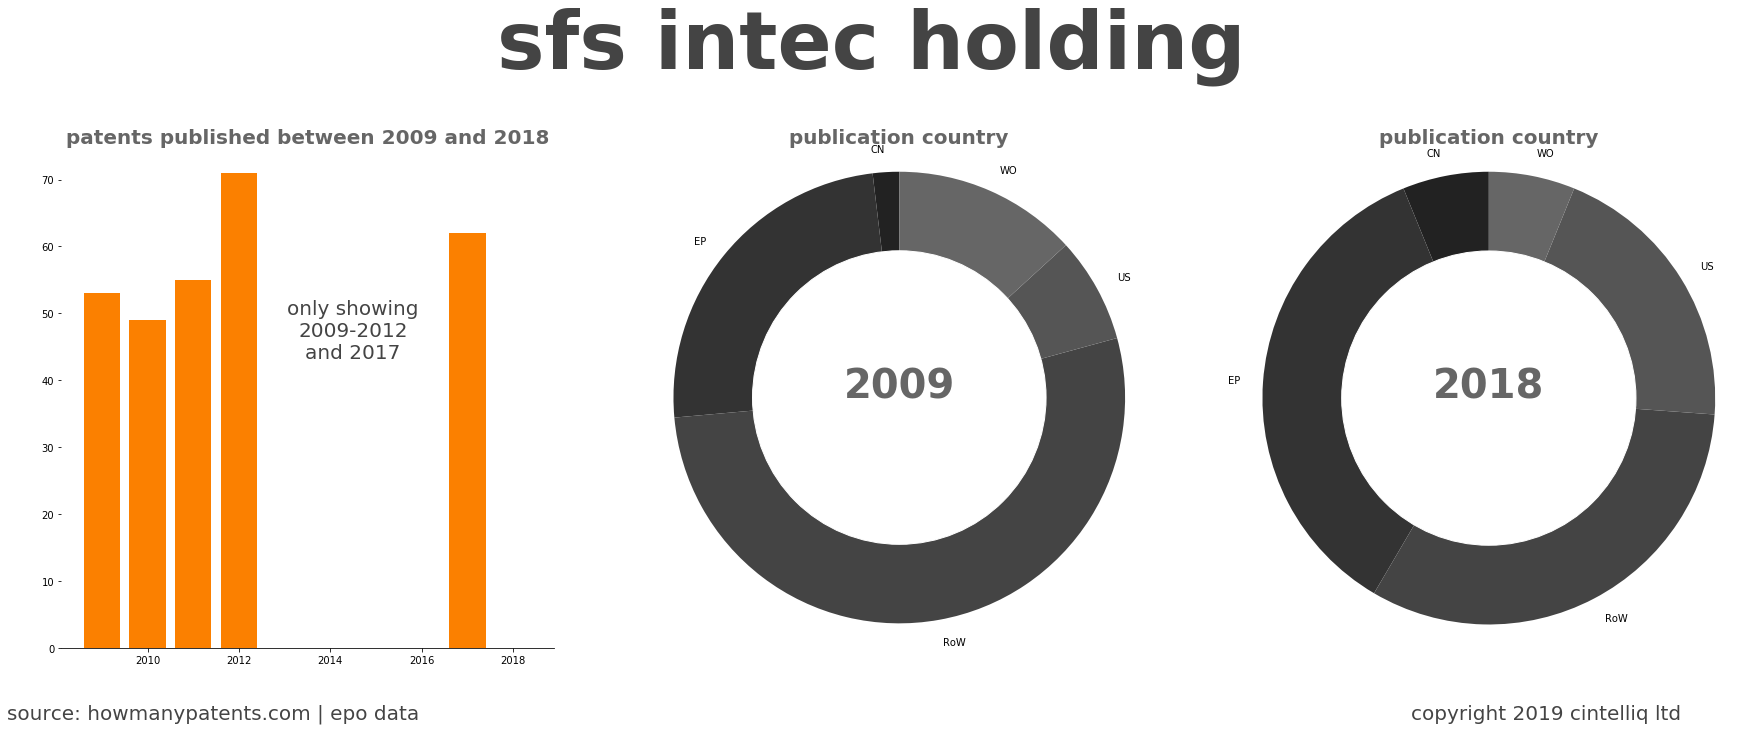 summary of patents for Sfs Intec Holding